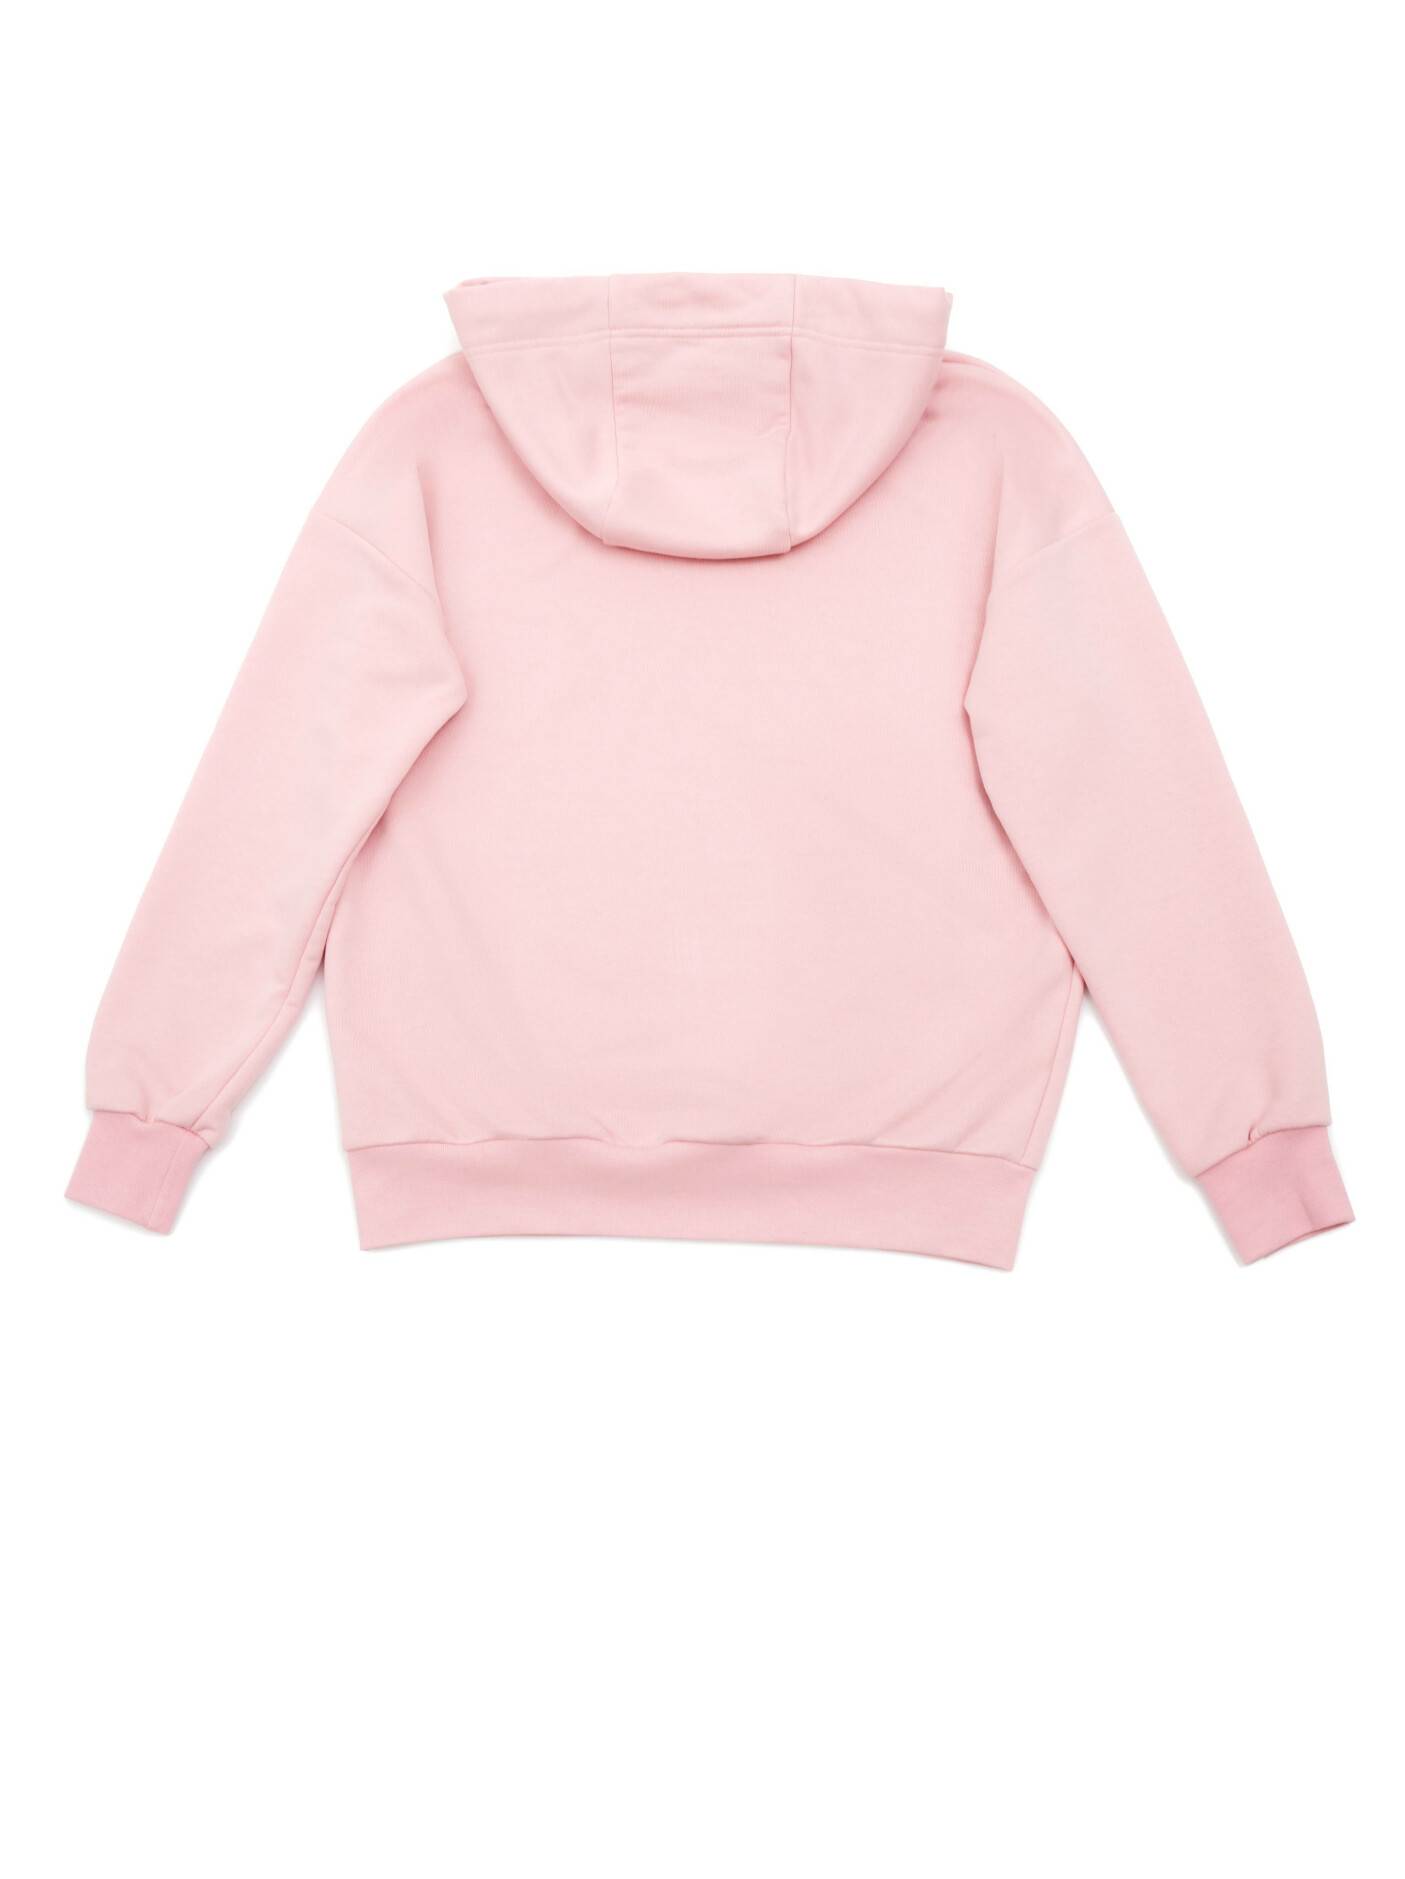 Oversize soft pink hoodie made of ultra-soft fabric with cotton LD 1105 ...